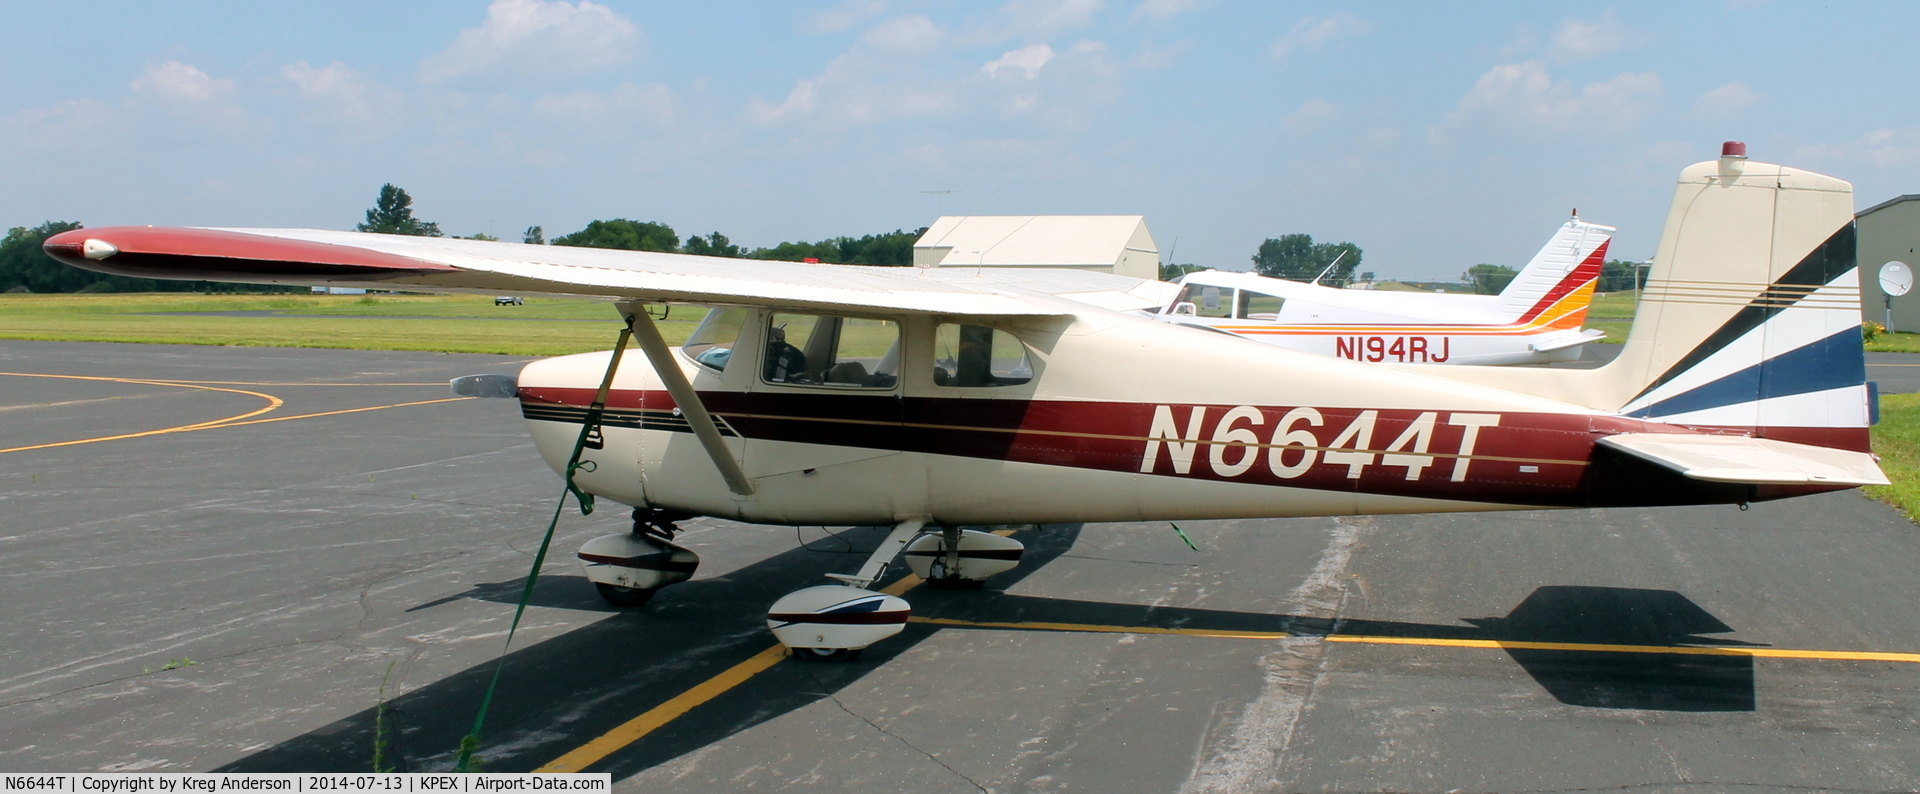 N6644T, 1960 Cessna 150A C/N 15059044, Cessna 150A on the ramp in Paynesville, MN.